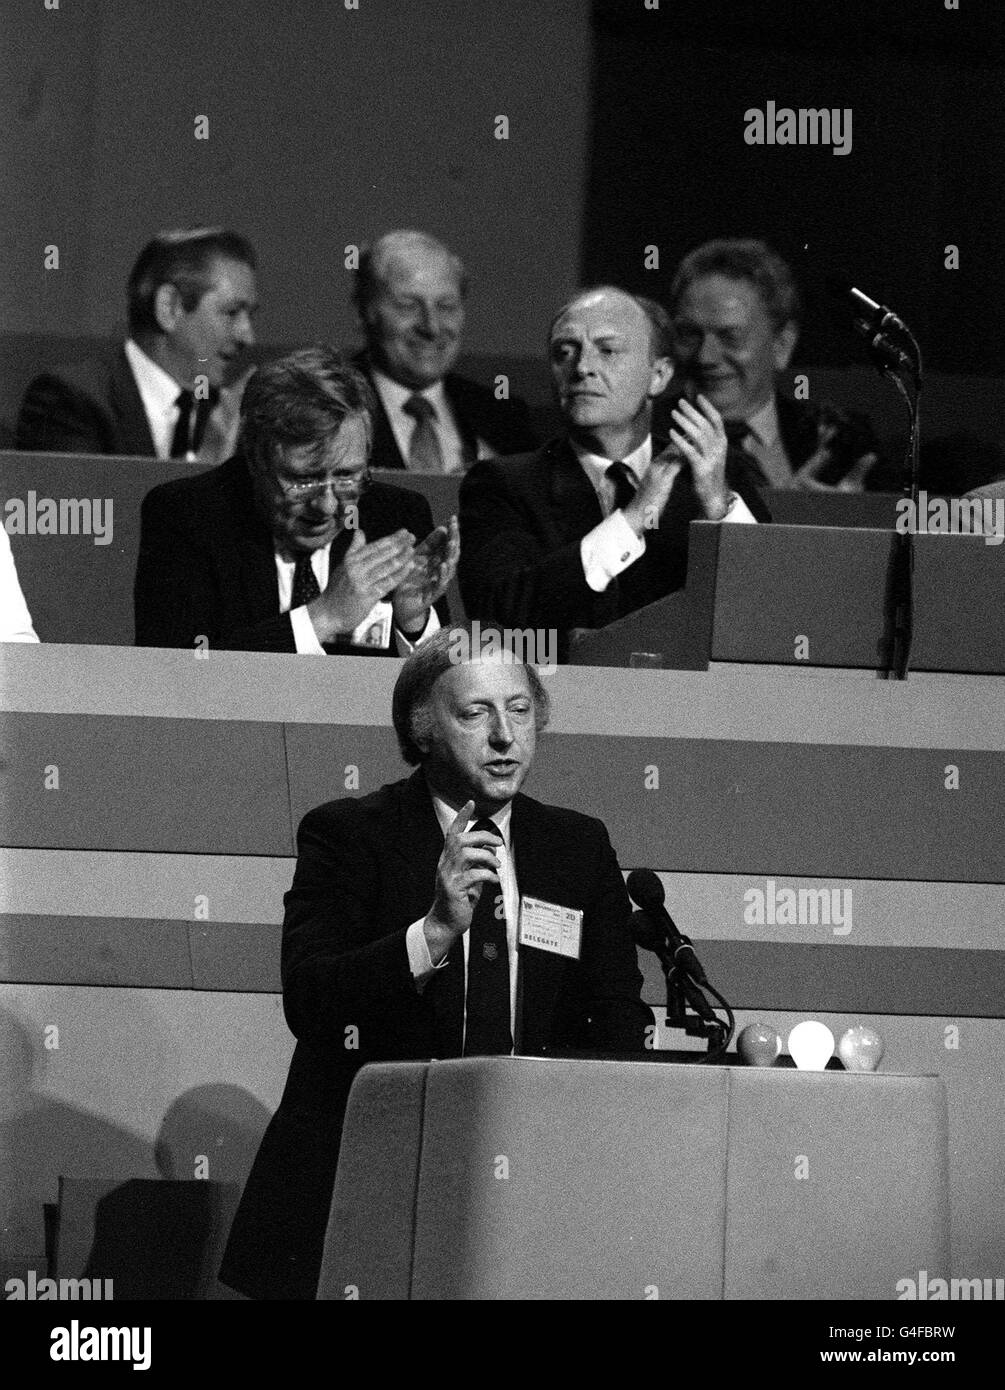 PA NEWS PHOTO 2/10/85  ARTHUR SCARGILL GIVING A SPEECH AT THE LABOUR PARTY PRESS CONFERENCE IN BOURNEMOUTH Stock Photo